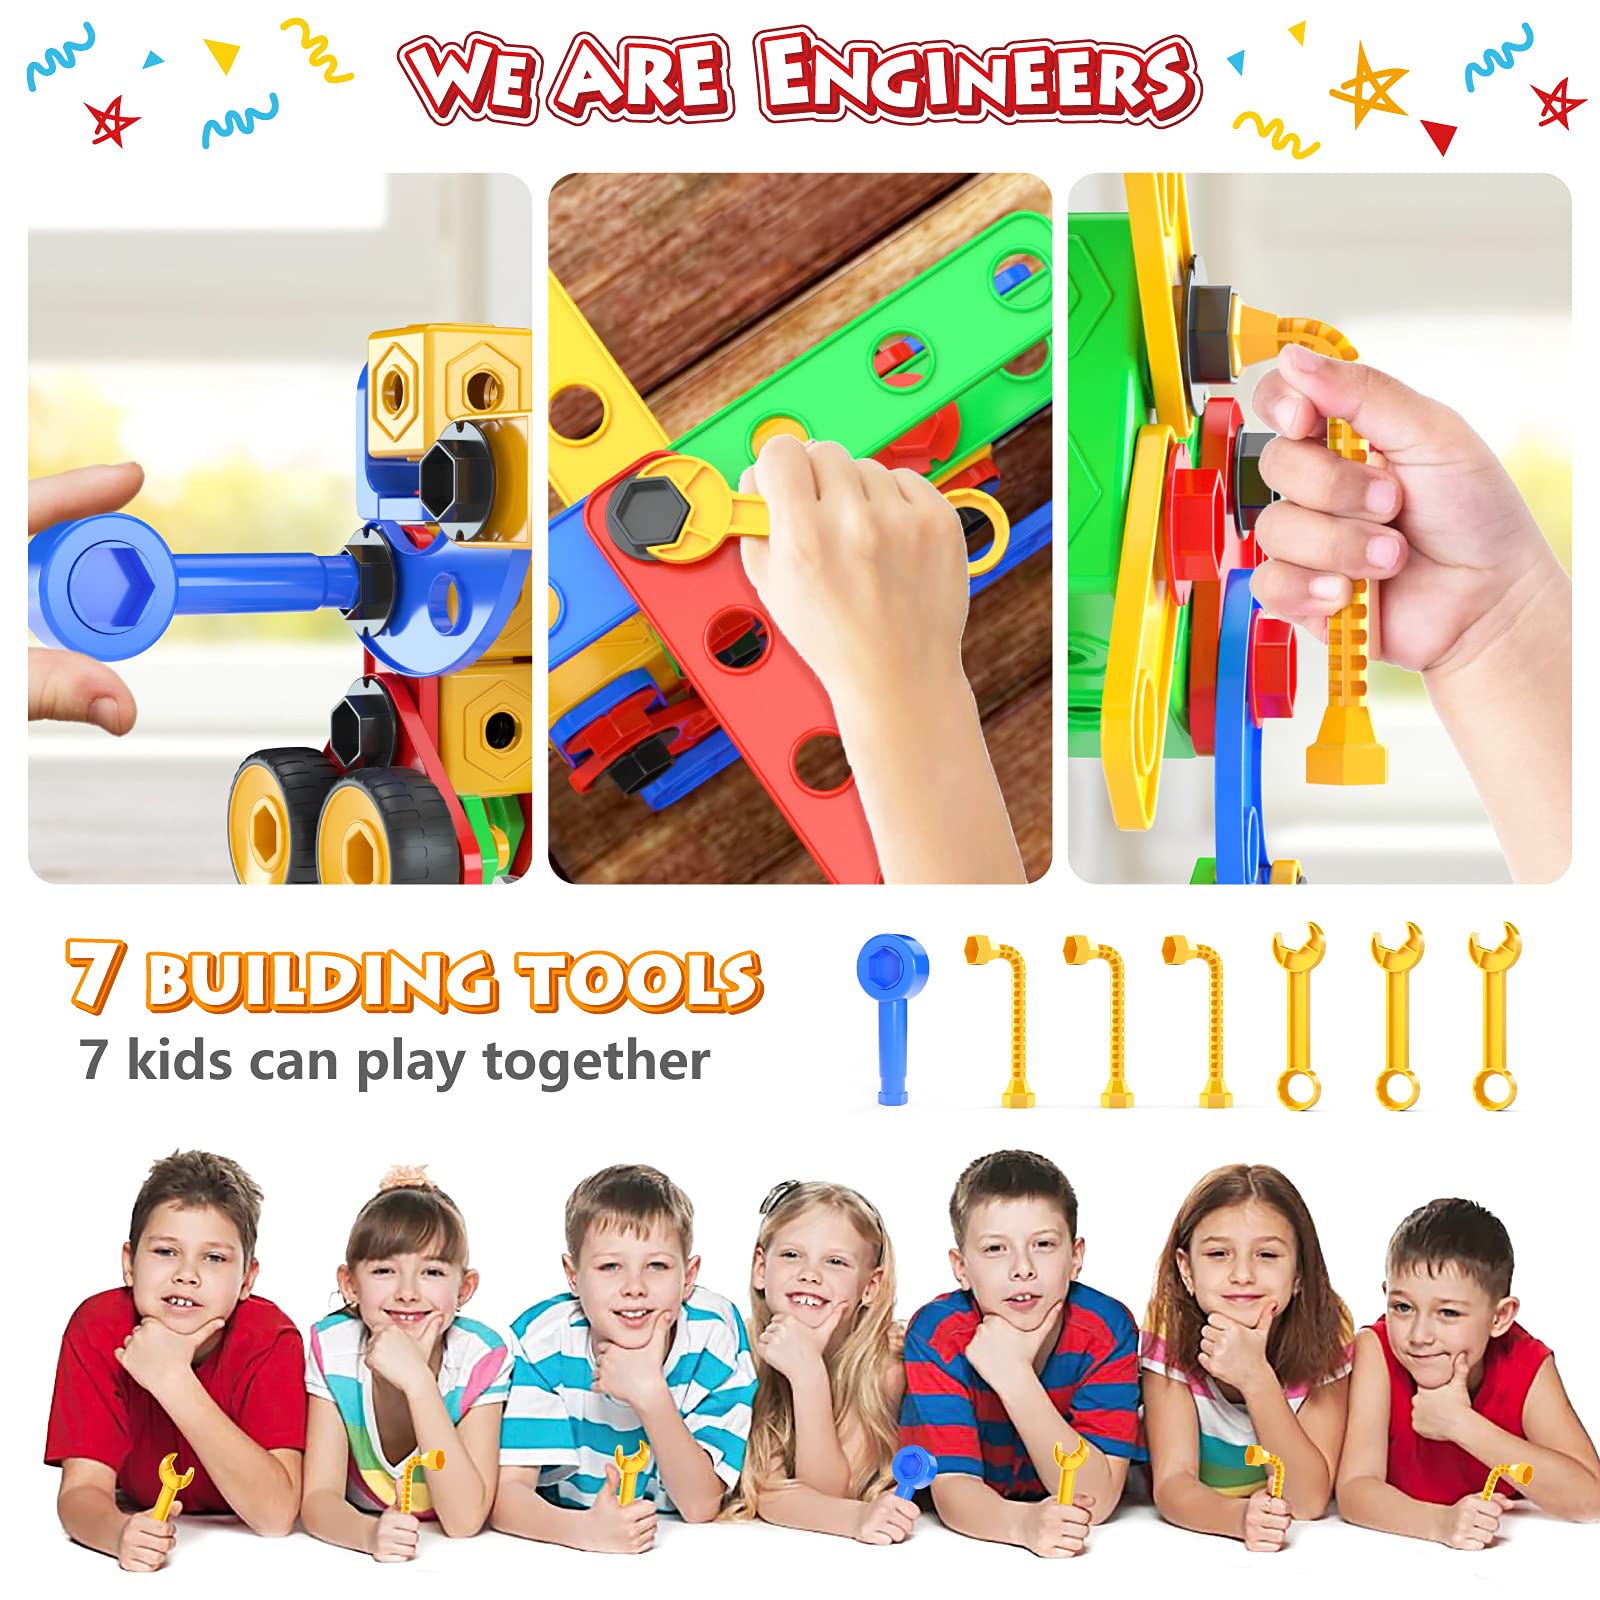 Jasonwell STEM Toys Building Blocks - 168 PCS Educational Construction Tiles Set Engineering Kit Creative Activities Games Learning Gift for Toddlers Kids Ages 3 4 5 6 7 8 9 10 Year Old Boys Girls